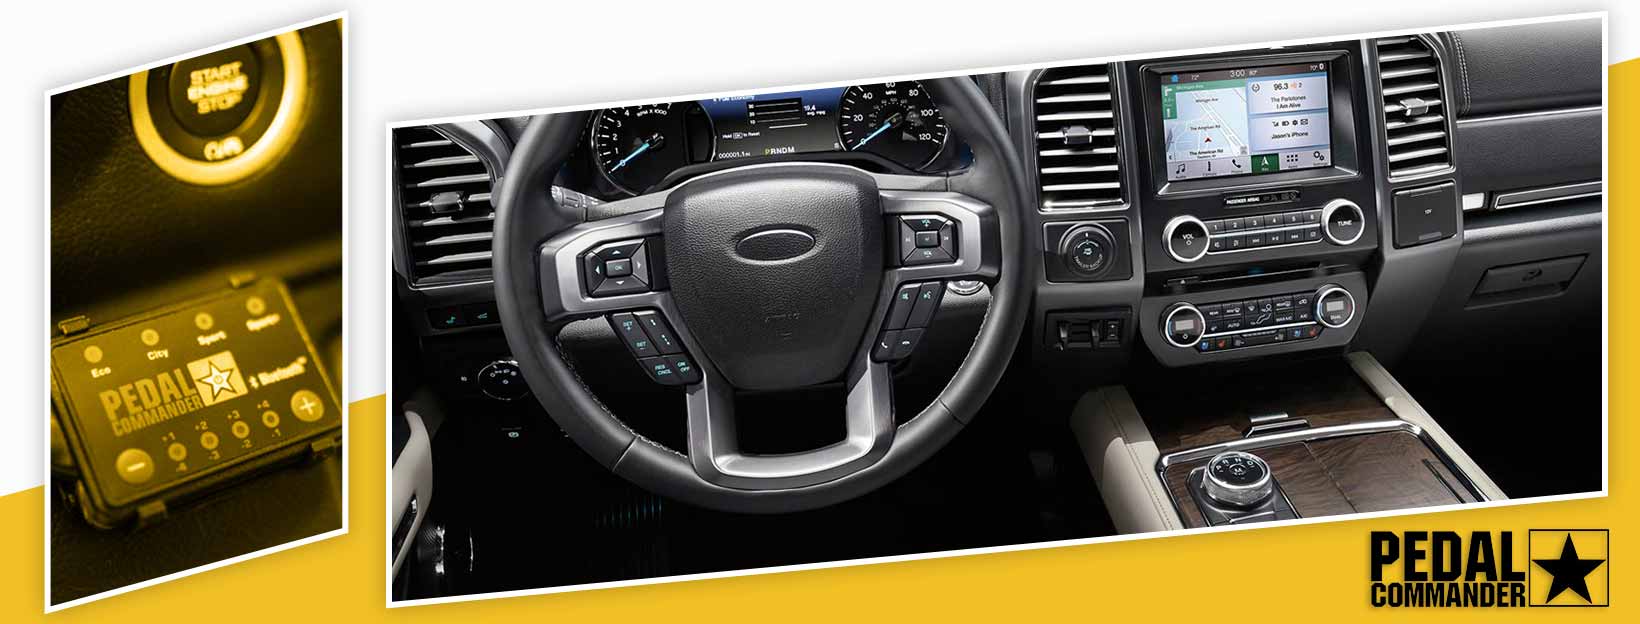 Pedal Commander for Ford Expedition - interior